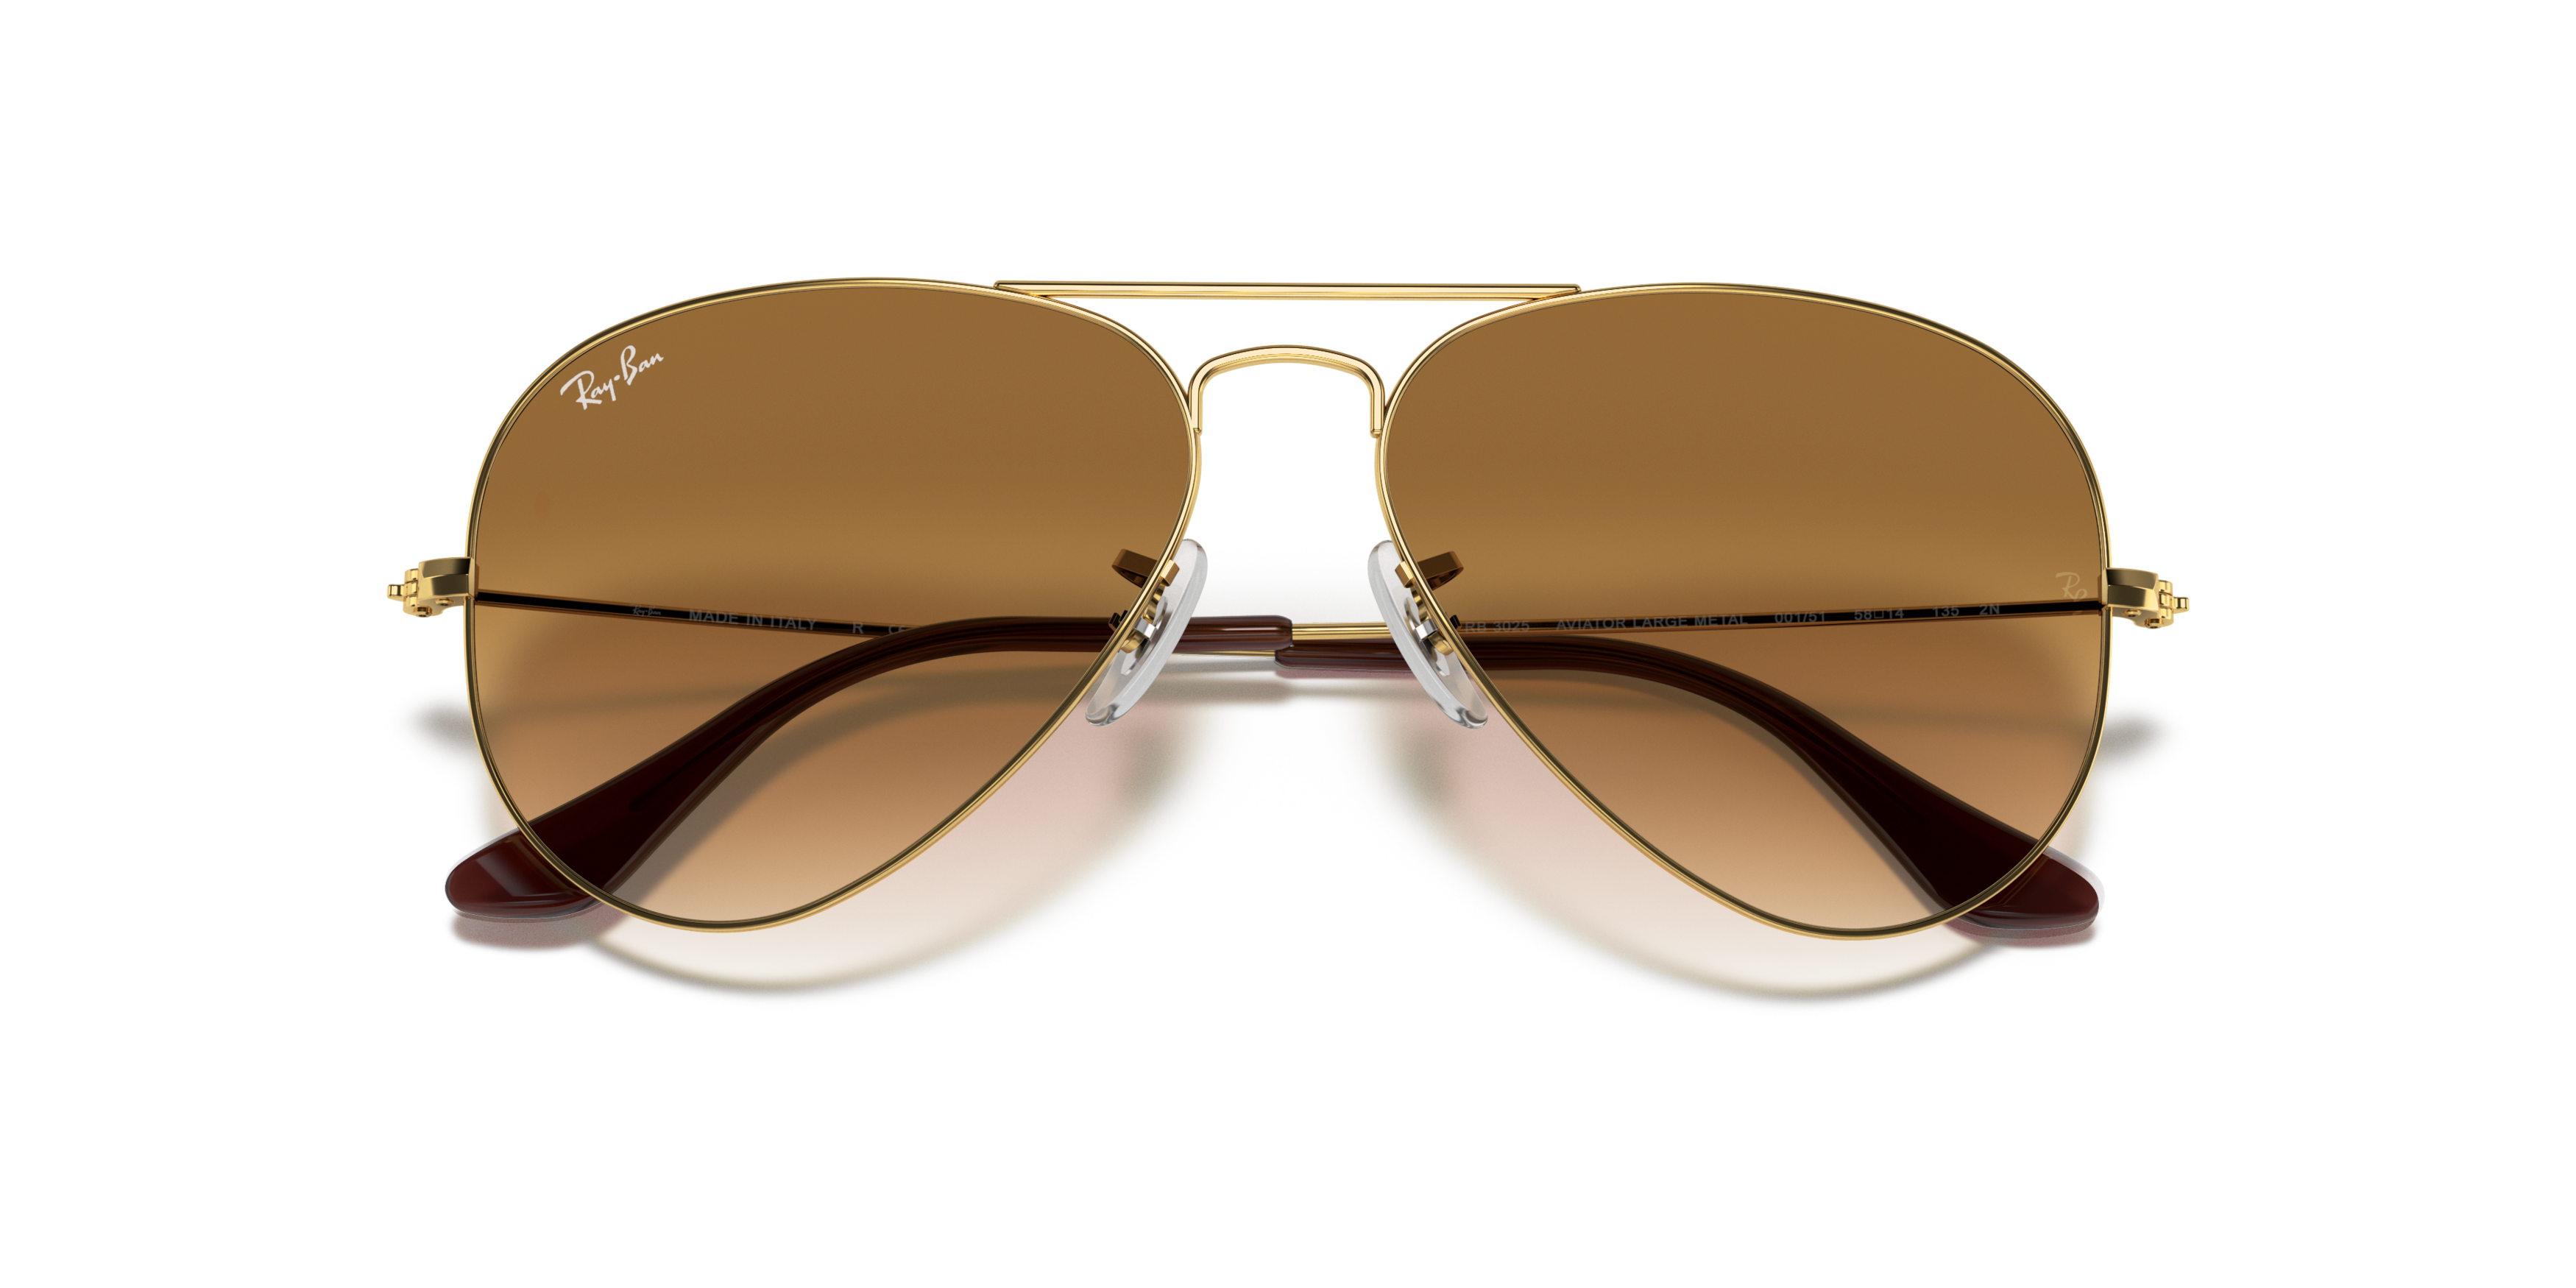 [products.image.folded] Ray-Ban Aviator RB3025 001/51